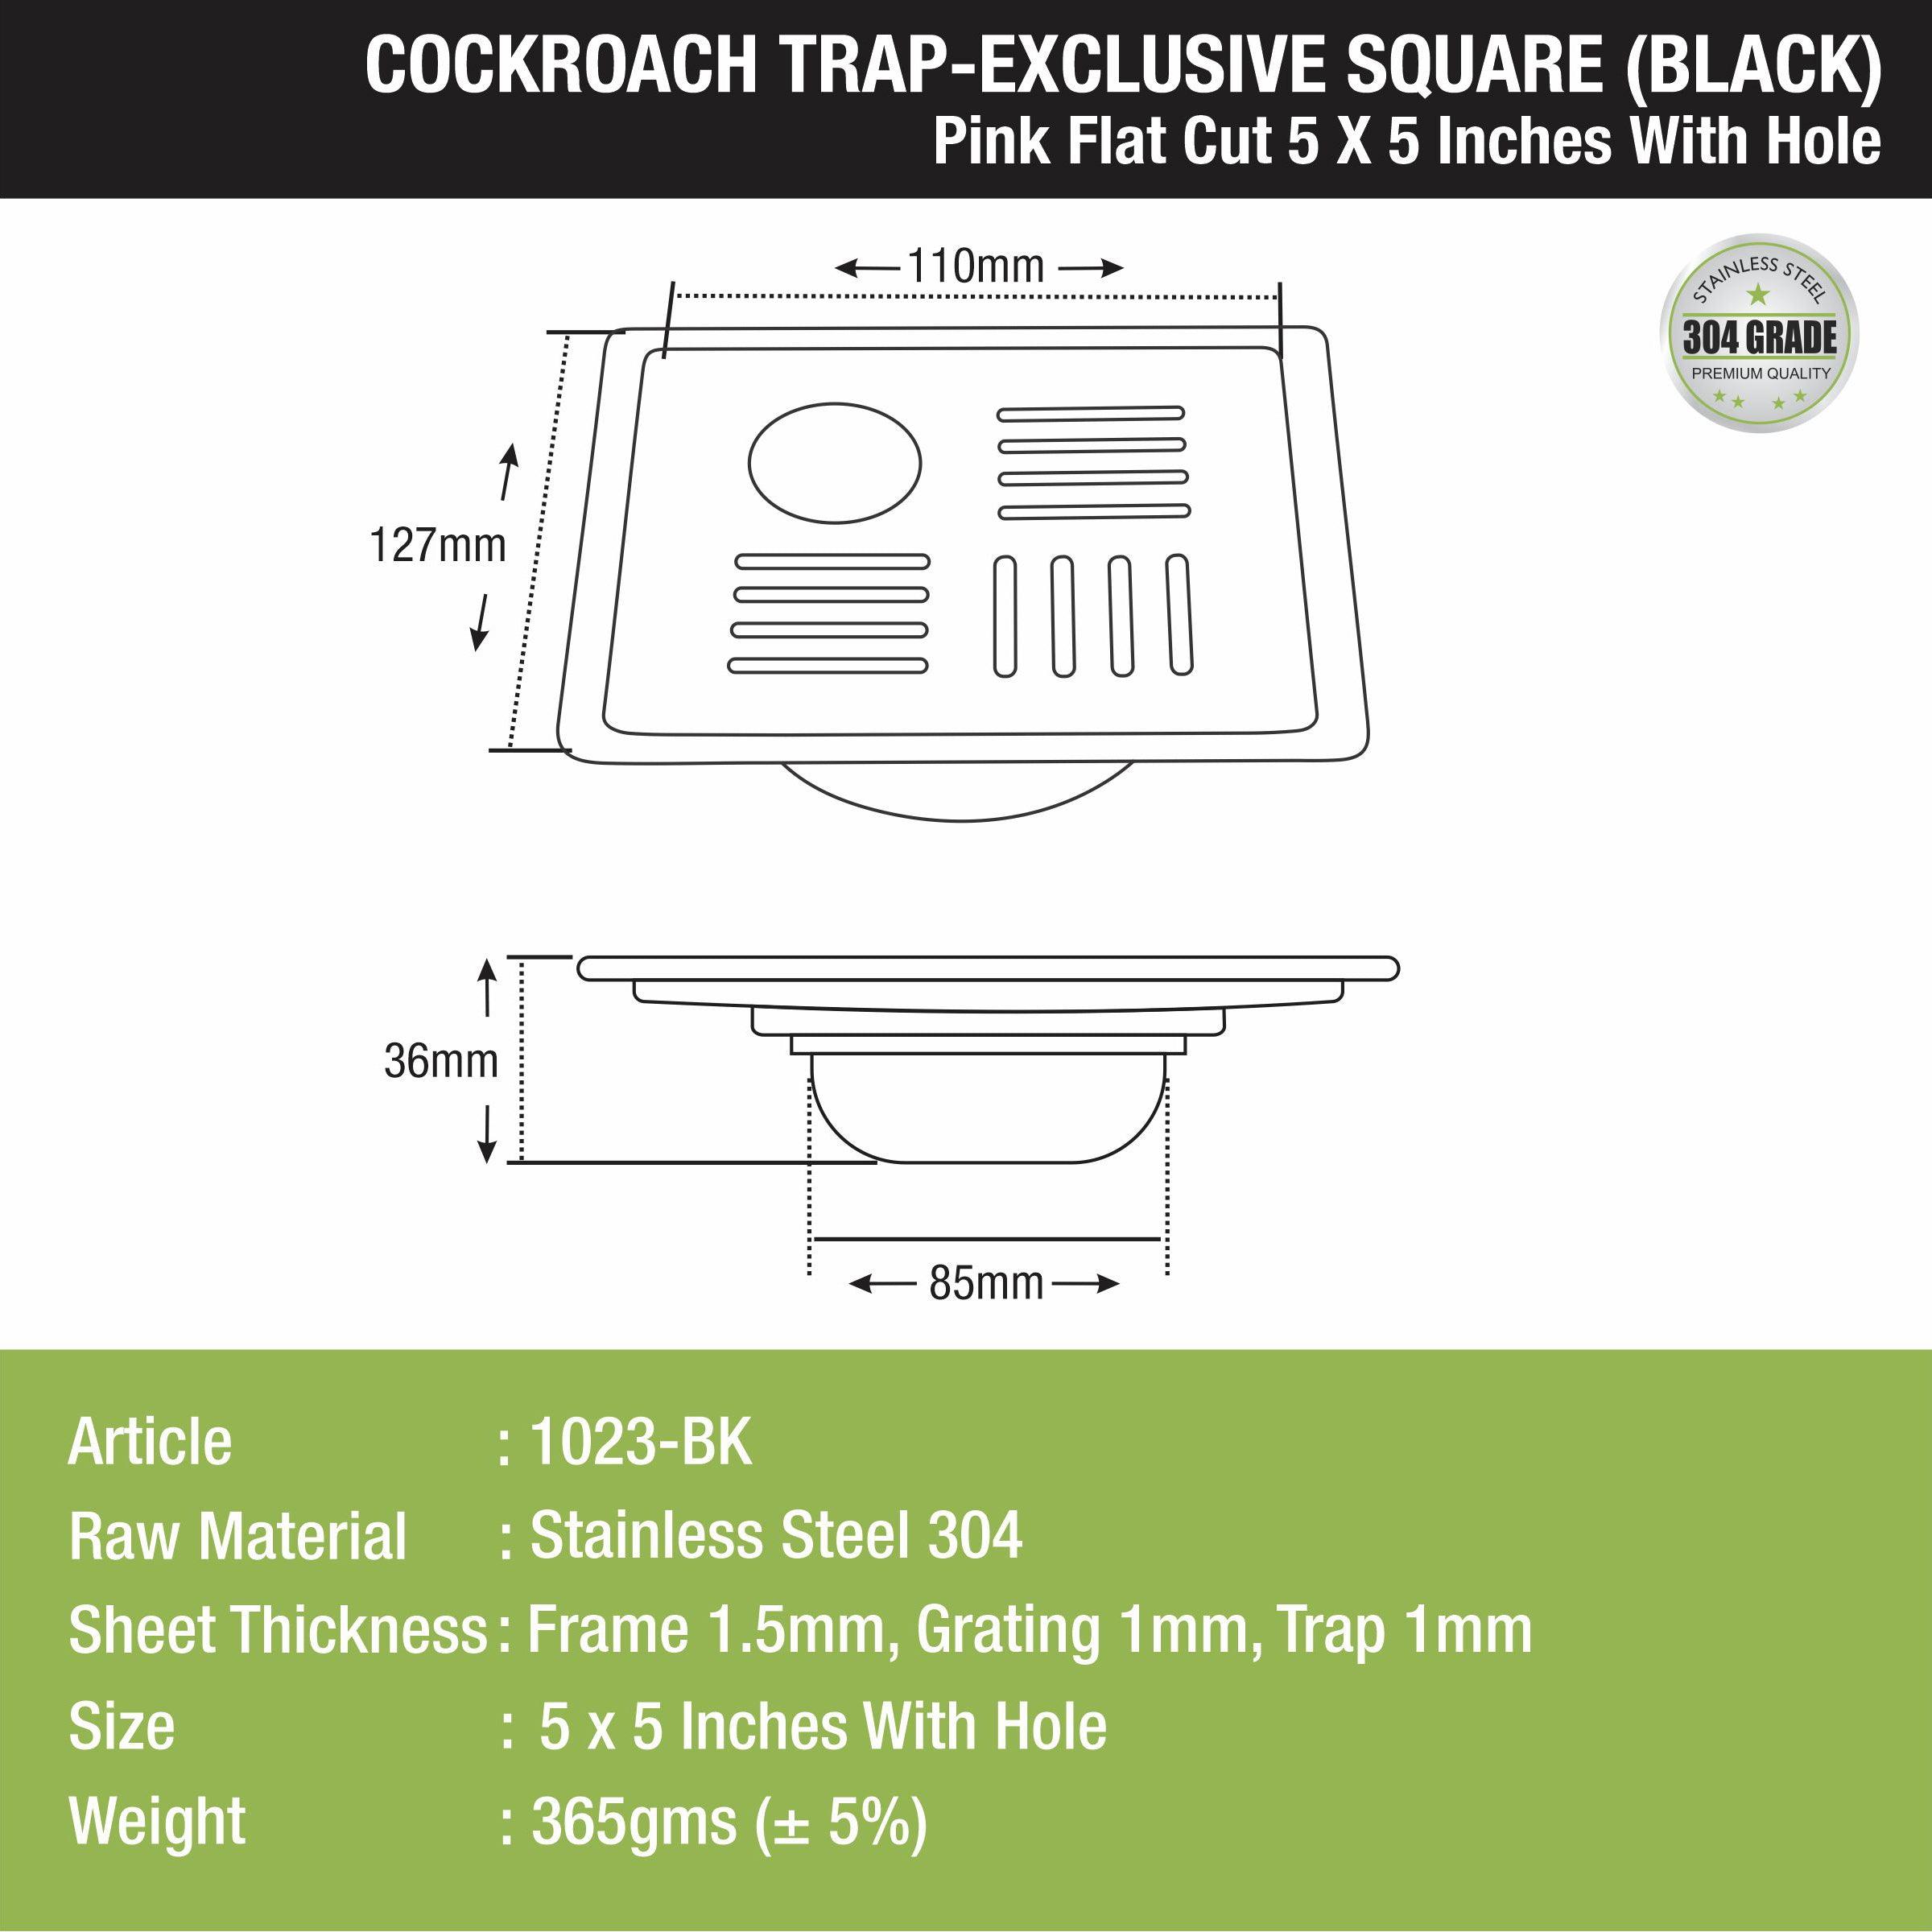 Pink Exclusive Square Flat Cut Floor Drain in Black PVD Coating (5 x 5 Inches) with Hole & Cockroach Trap  size and measurement 